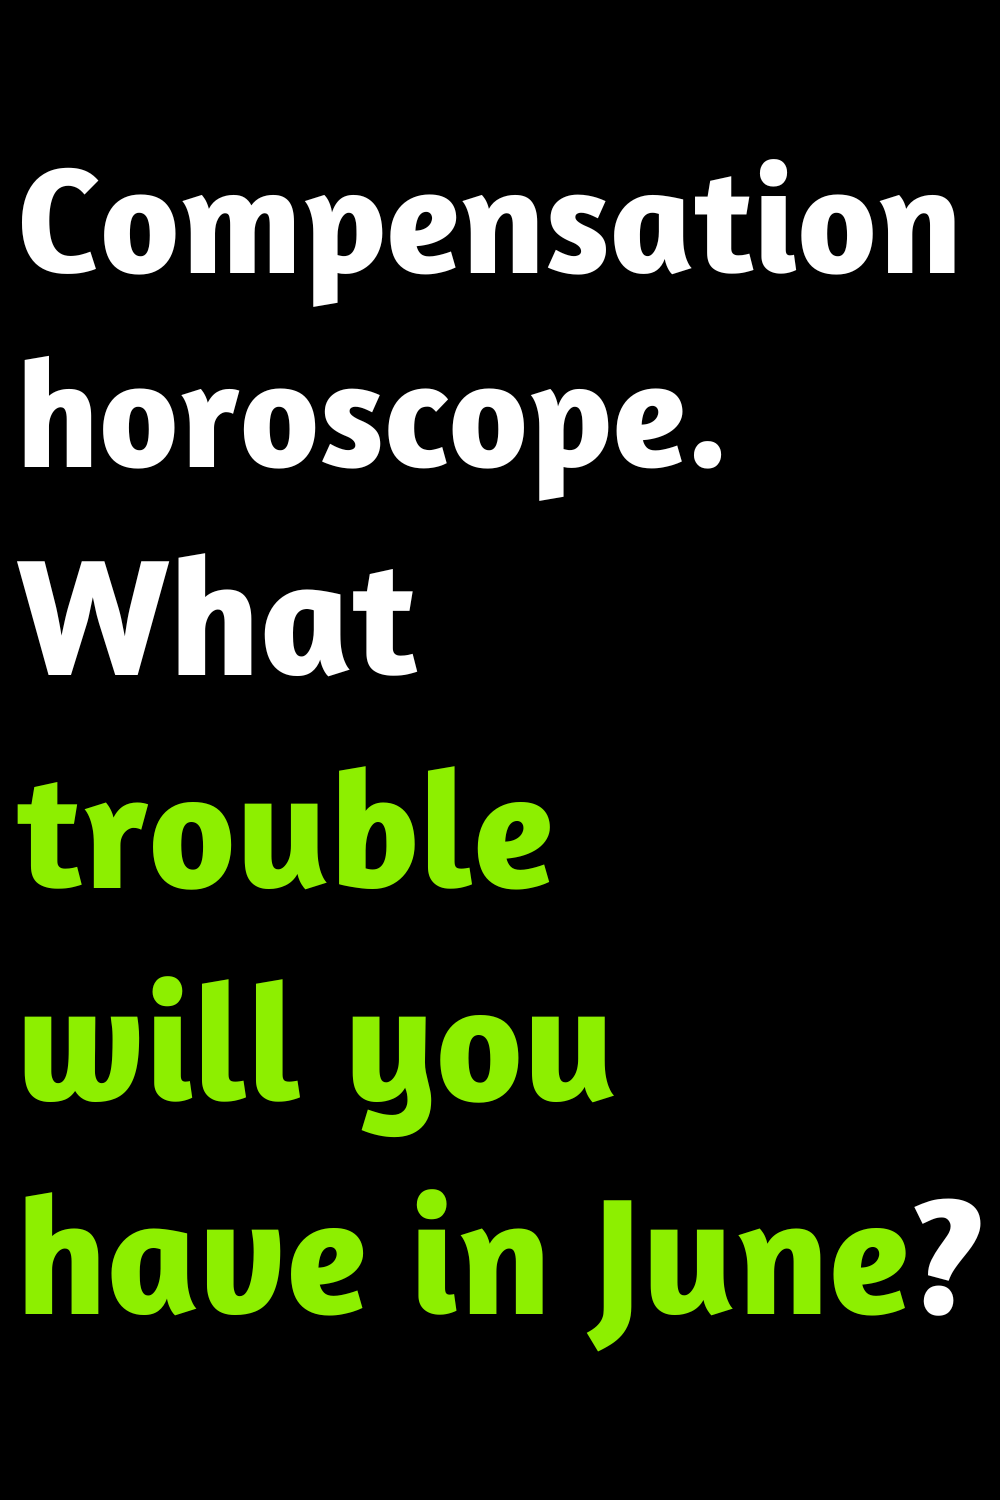 Compensation horoscope. What trouble will you have in June?